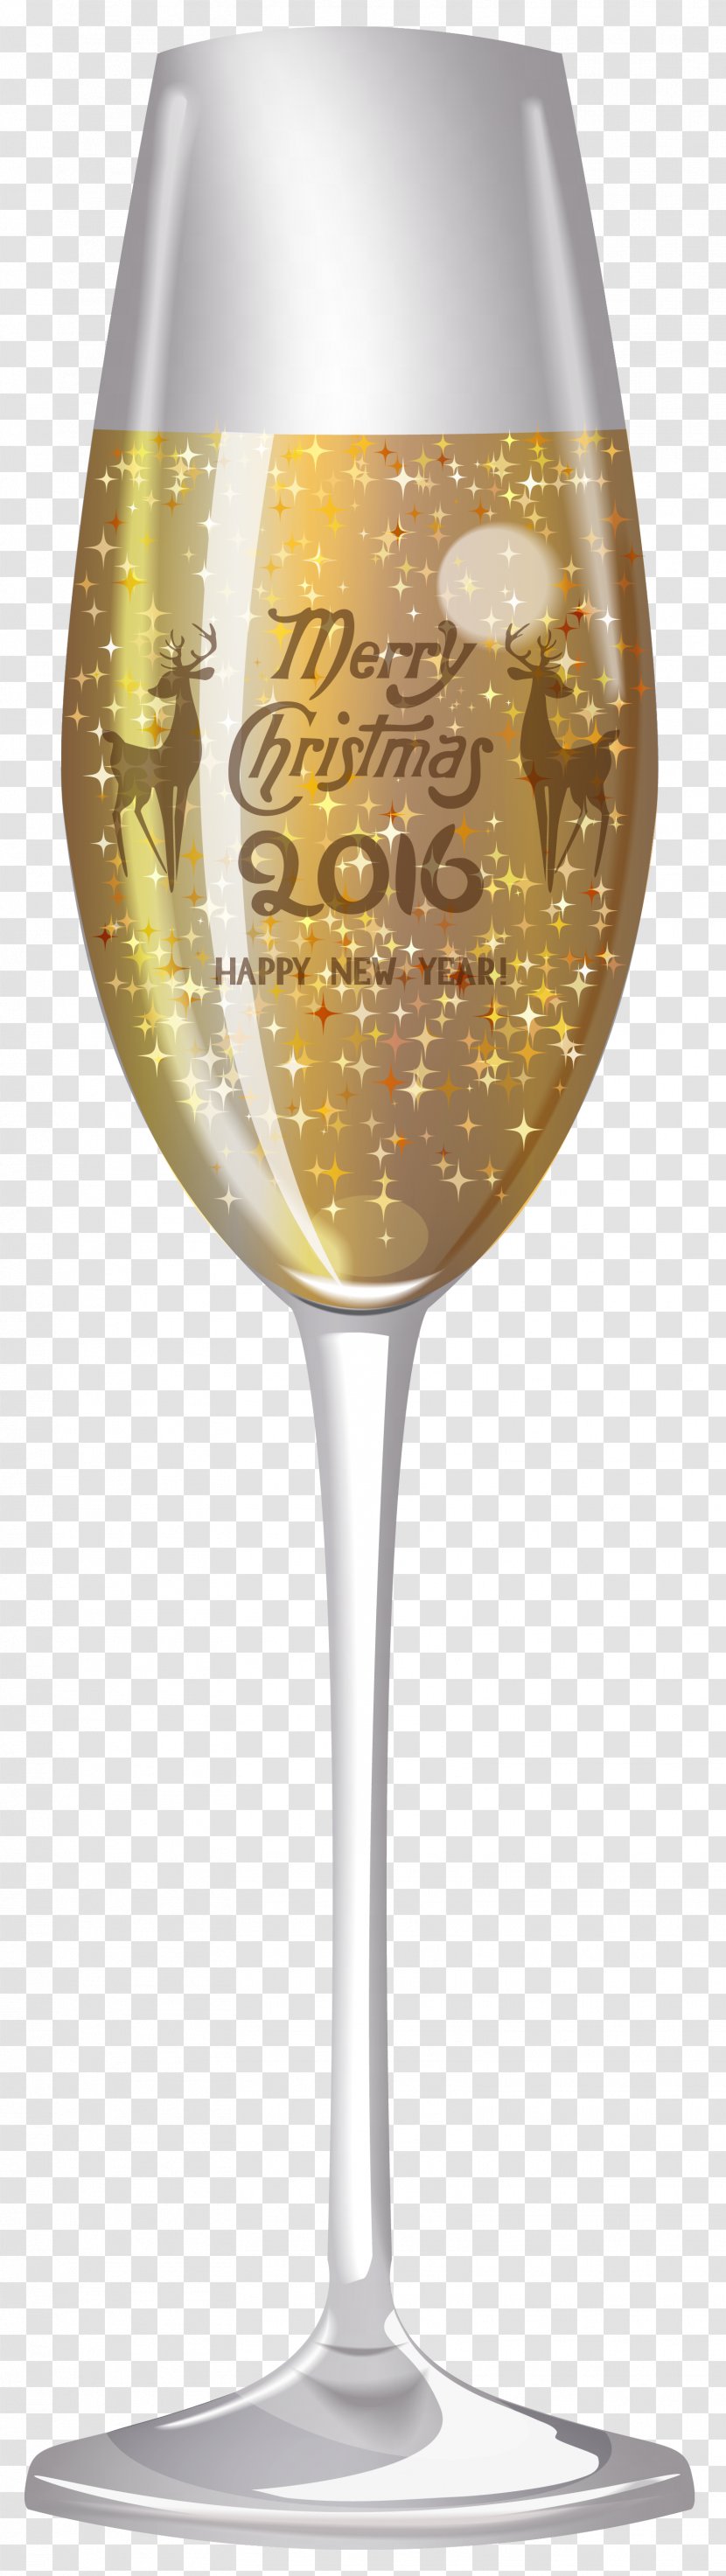 White Wine Champagne Glass - Cocktail - 2016 Clipart Image Transparent PNG